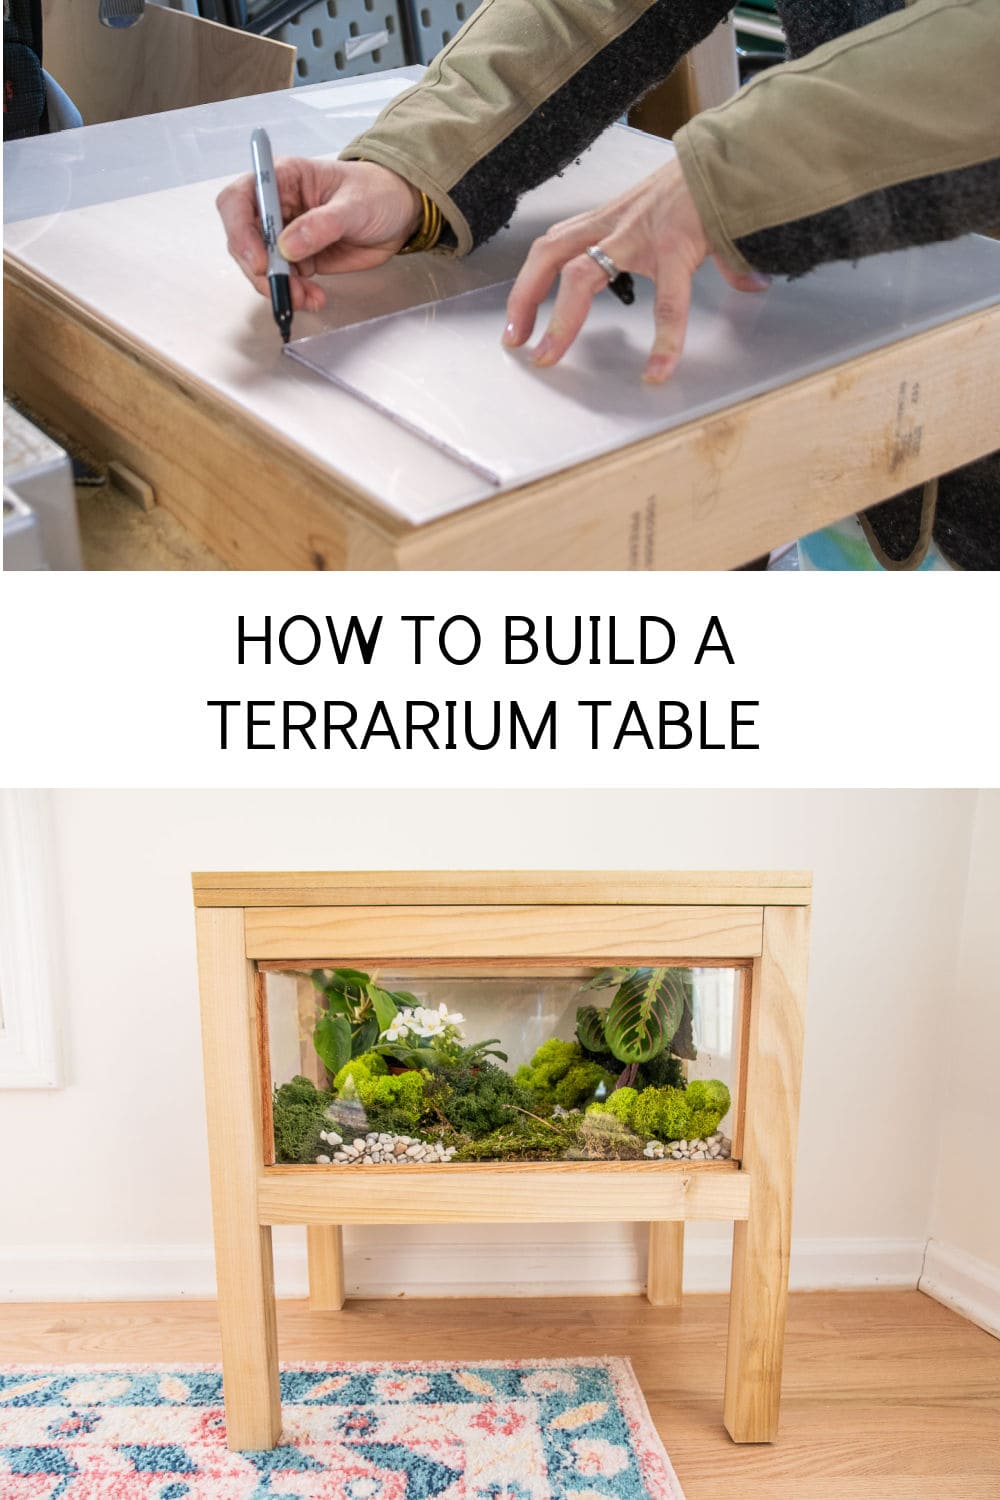 HOW TO BUILD A TERRARIUM TABLE 1 - At Charlotte's House